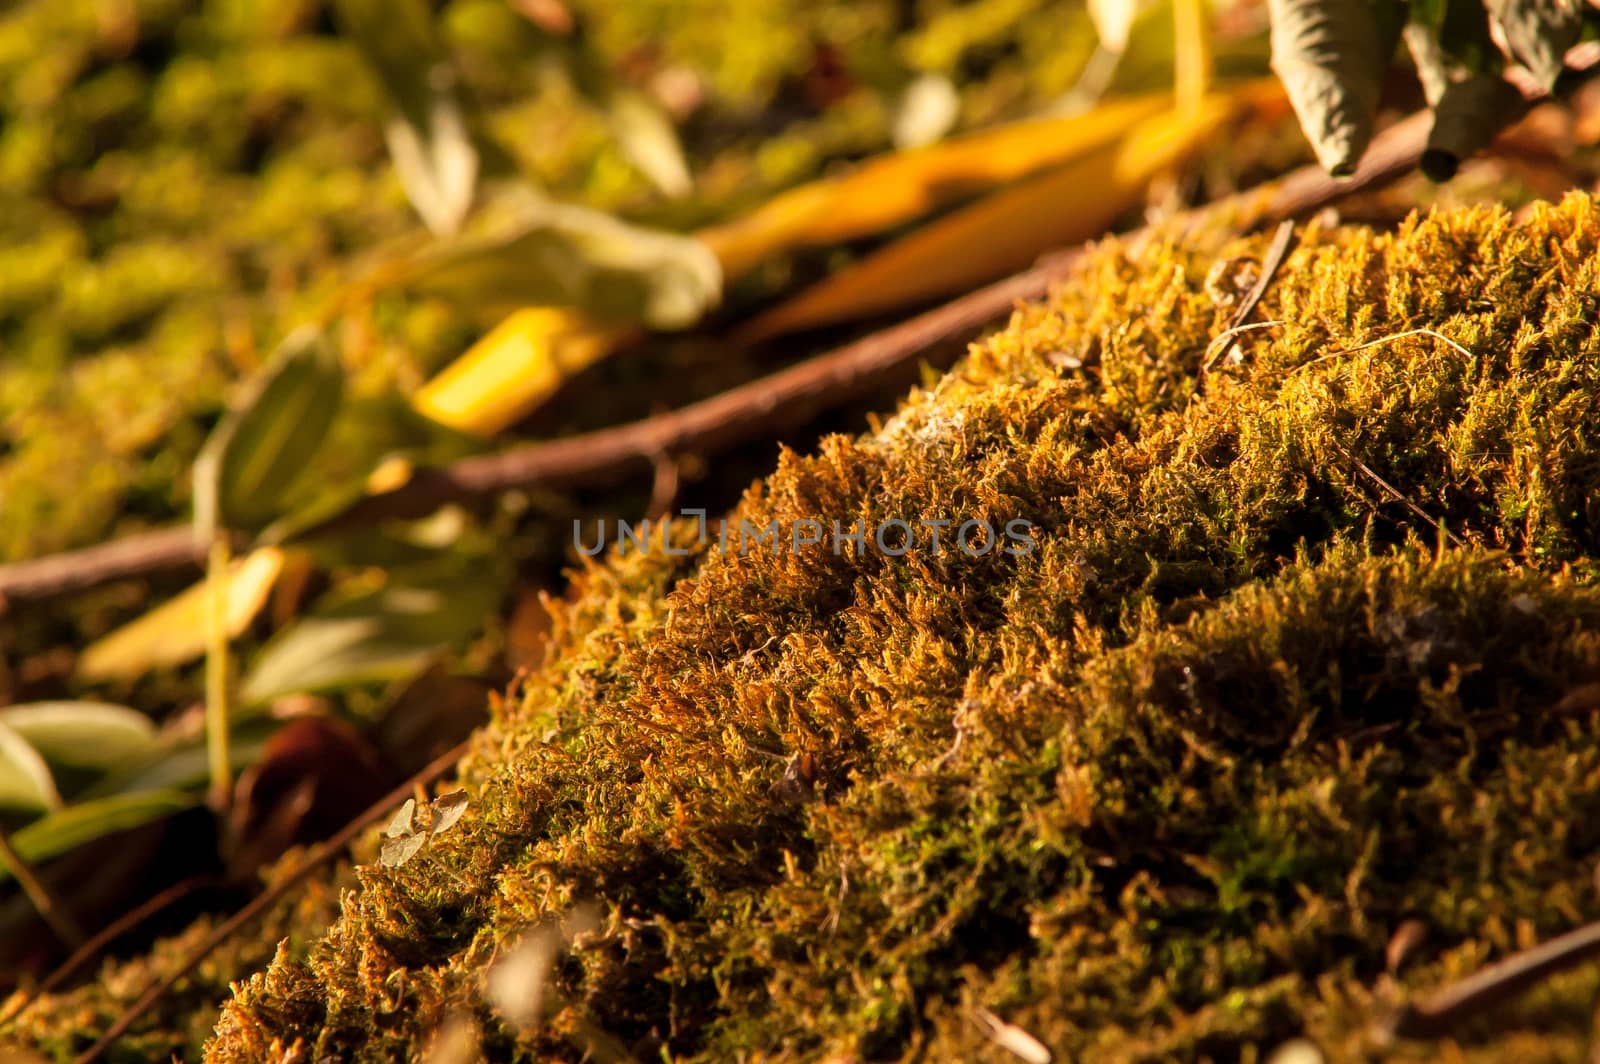 moss growing near the water by antonius_